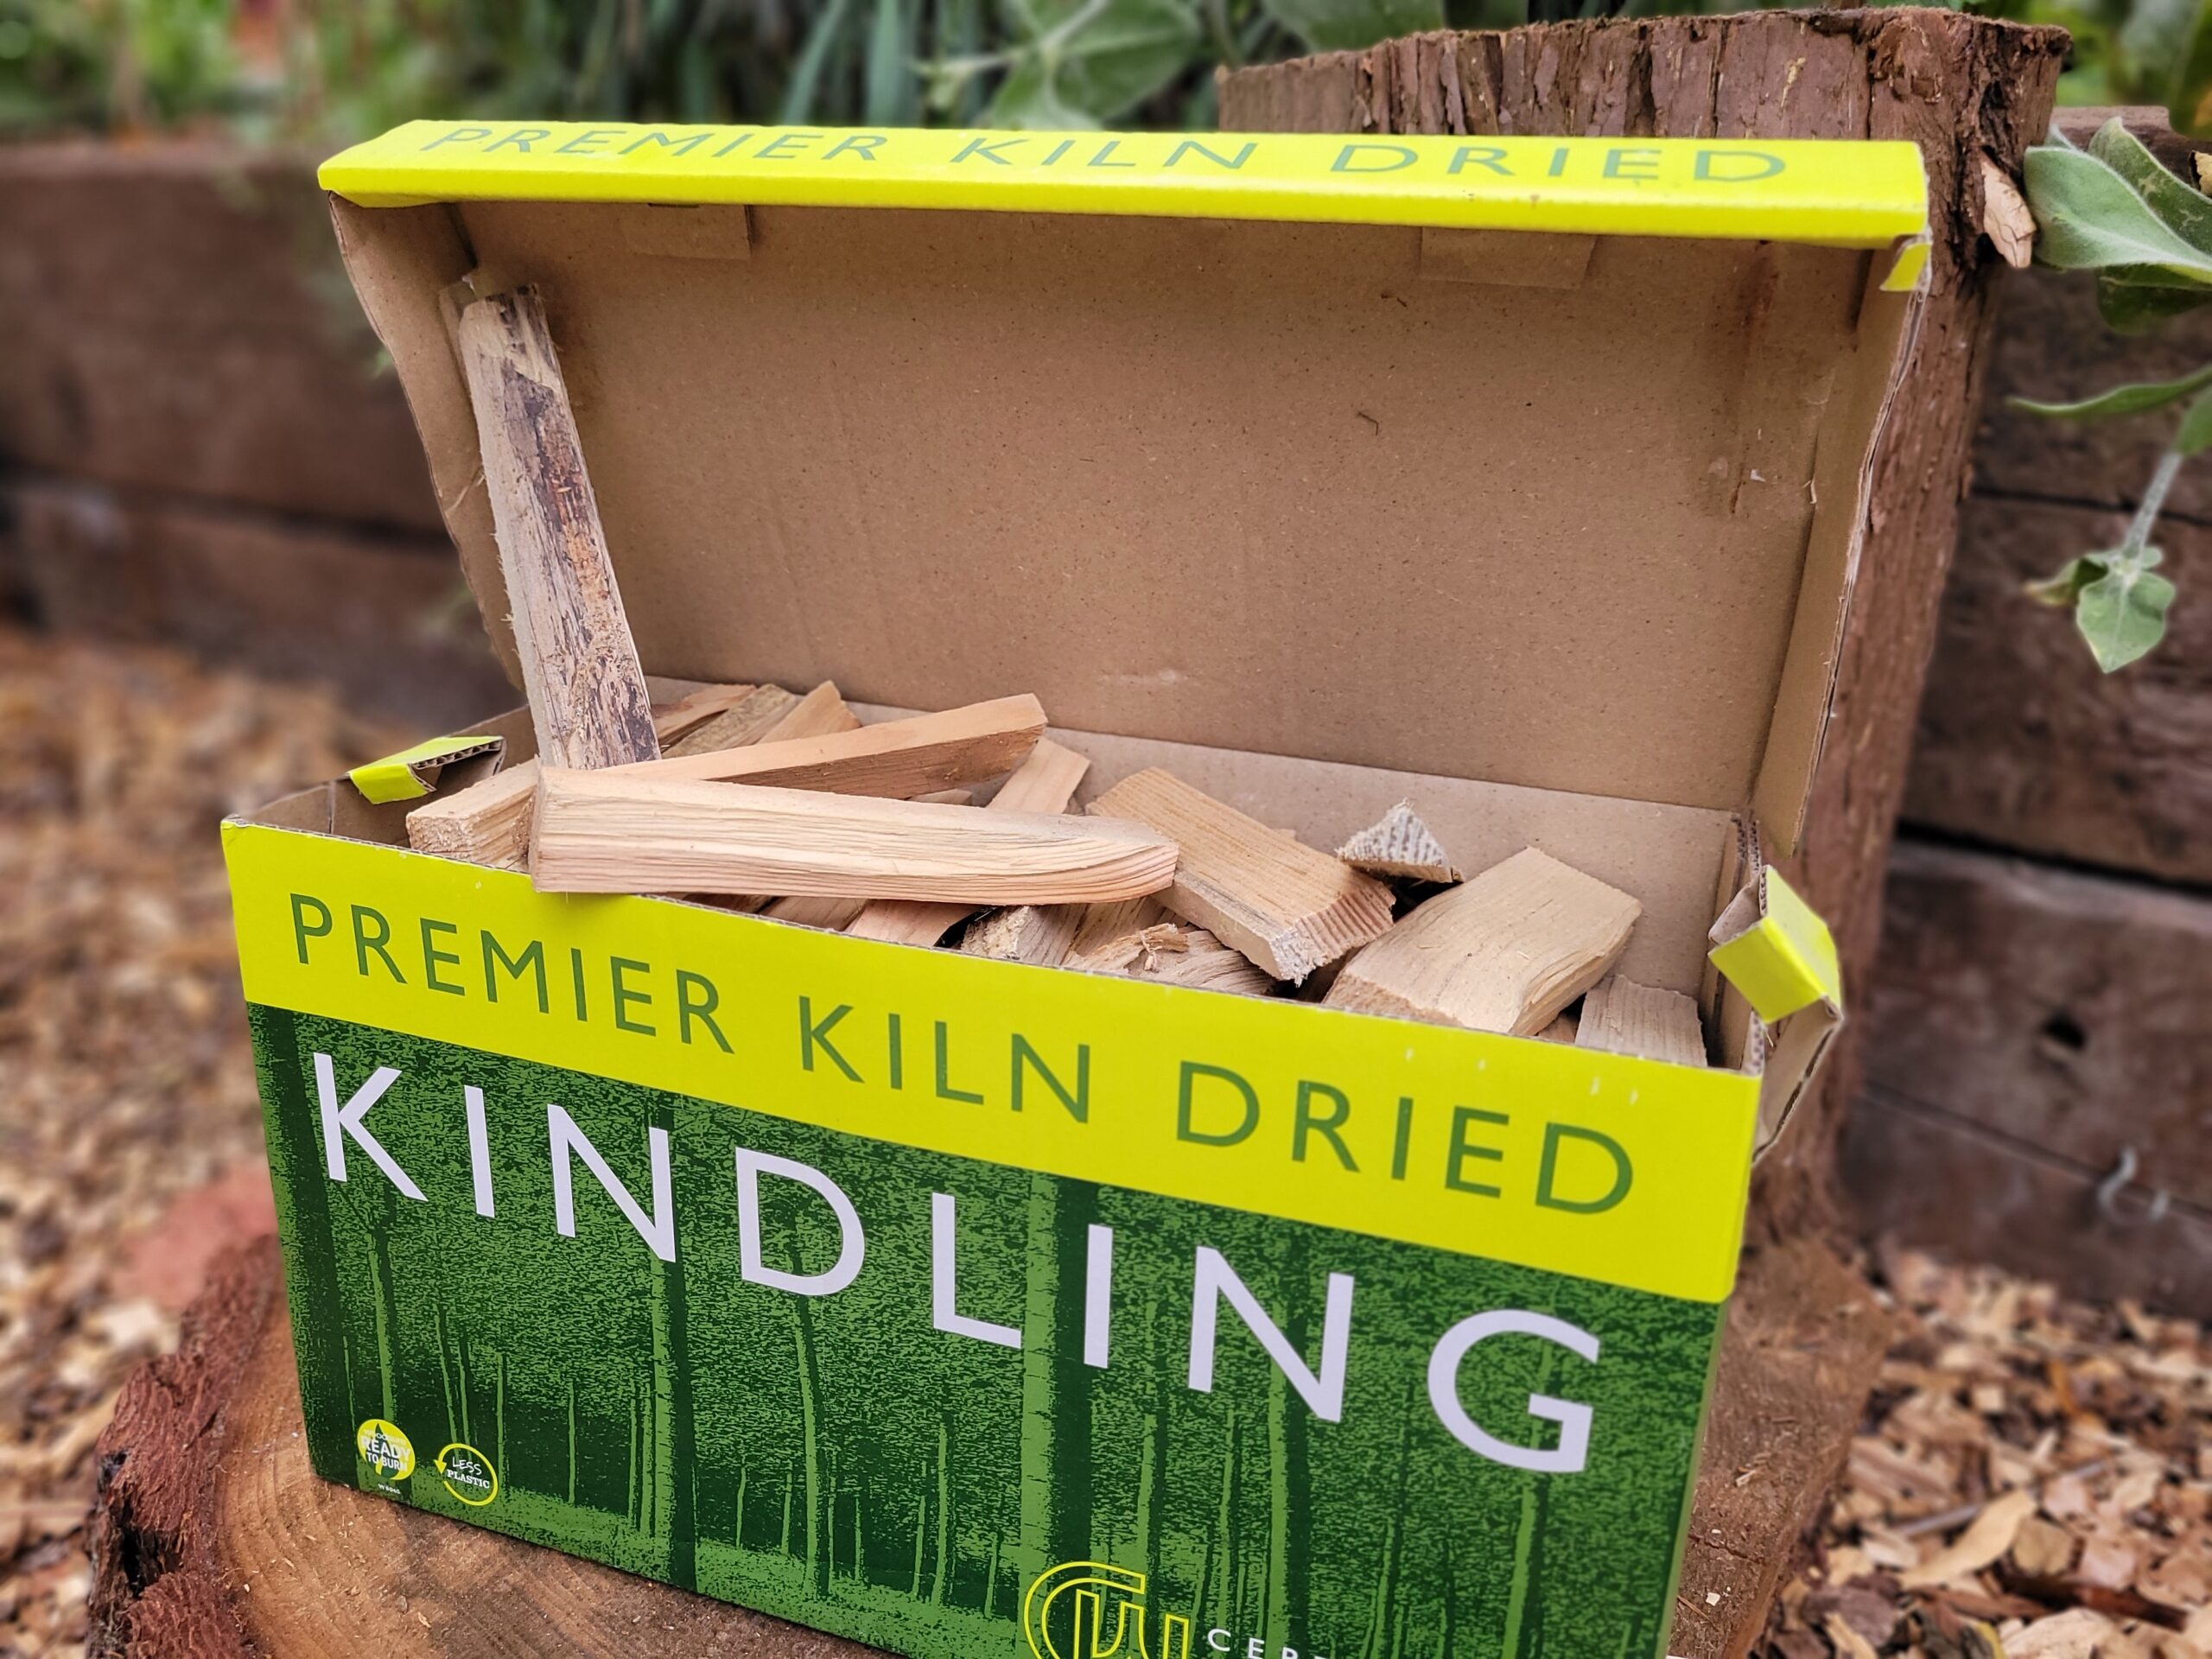 Certainly Woods Kiln dried Kindling: 1 box of approx. 100 sticks